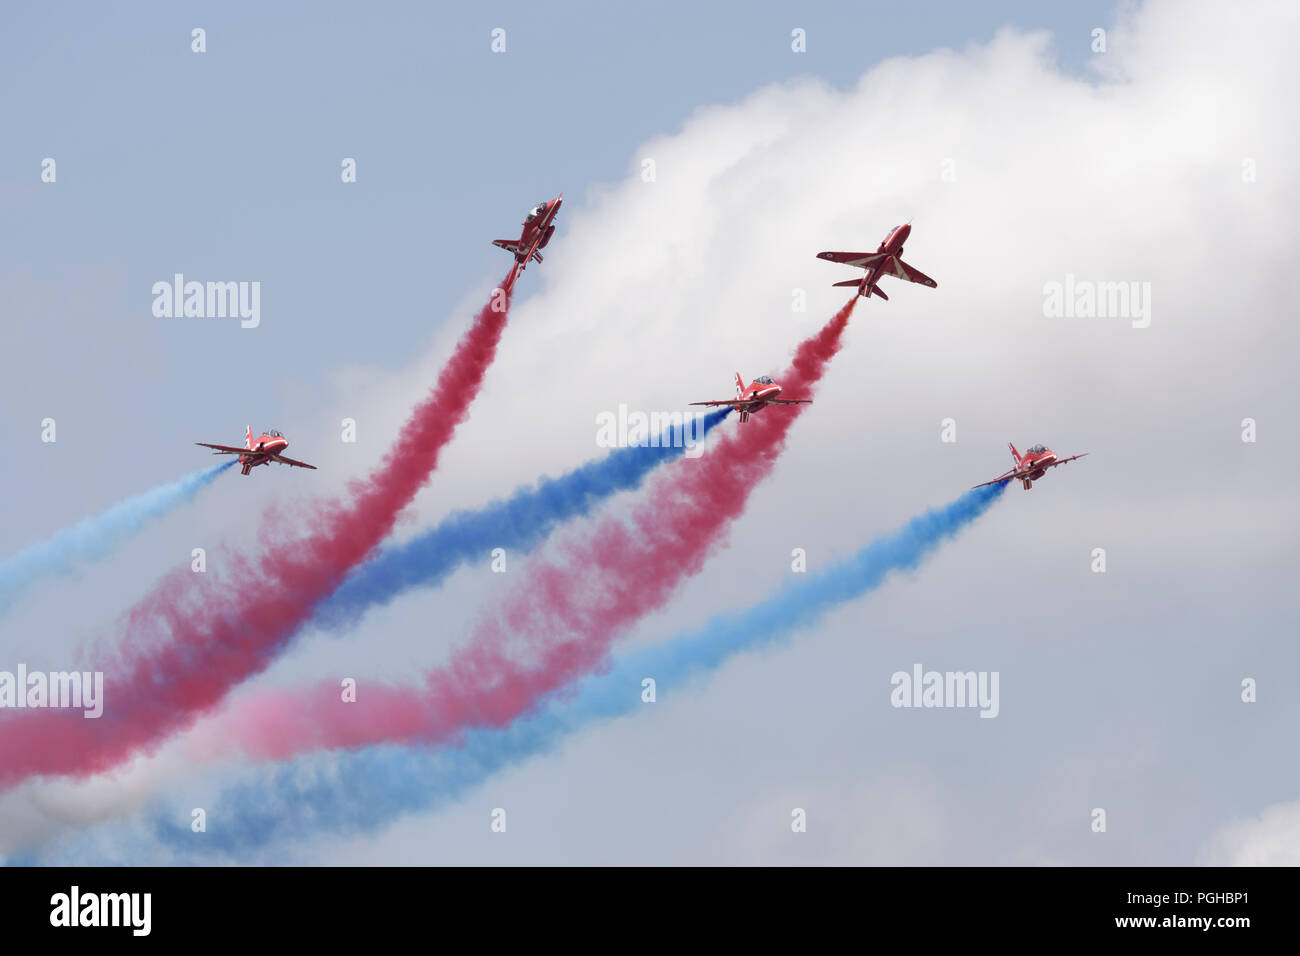 The British Royal Air Force Red Arrows Military Aerobatic Display team Enid section of 5 Hawk Jet Trainers performing rollbacks at the RIAT Stock Photo